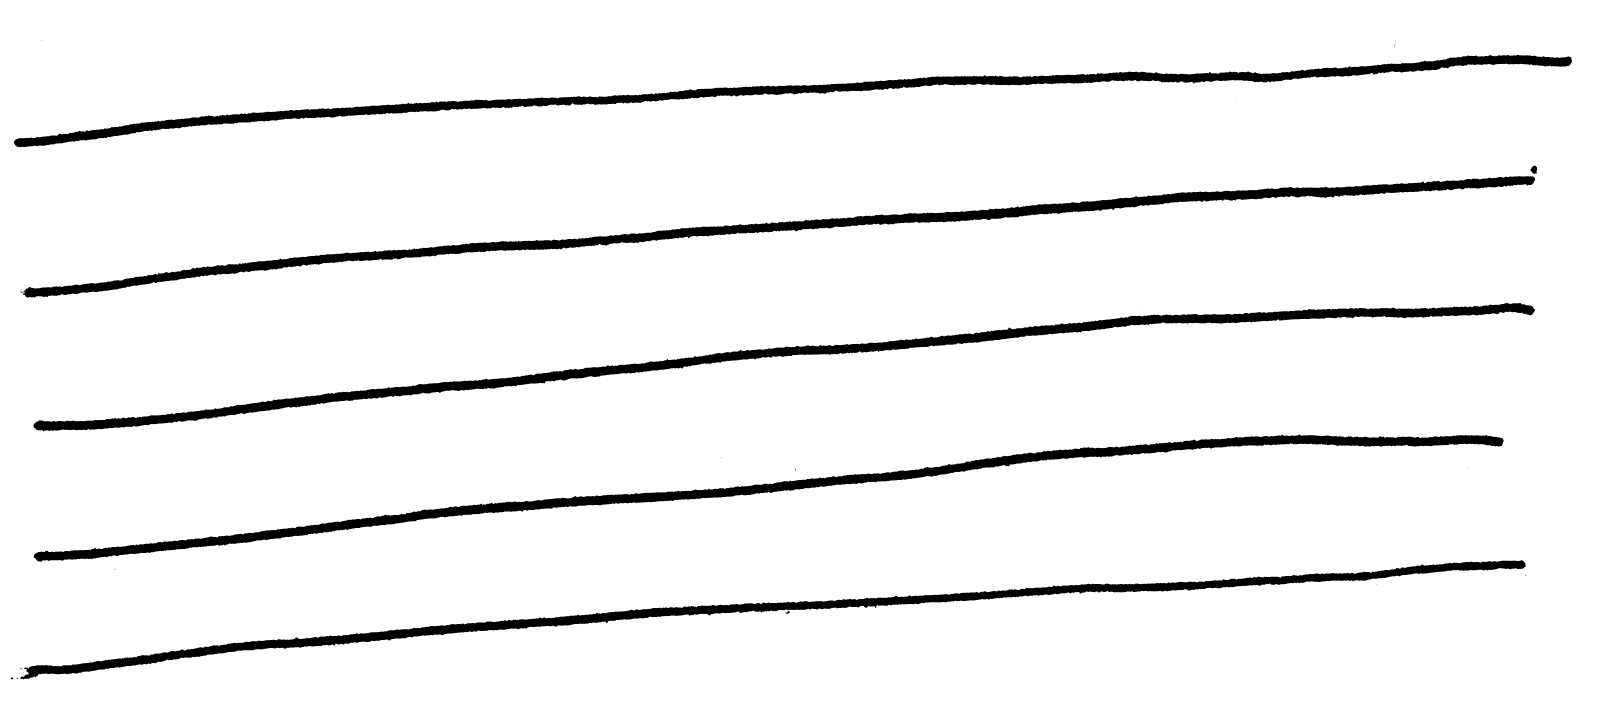 draw long straight lines as a drawing warm-up